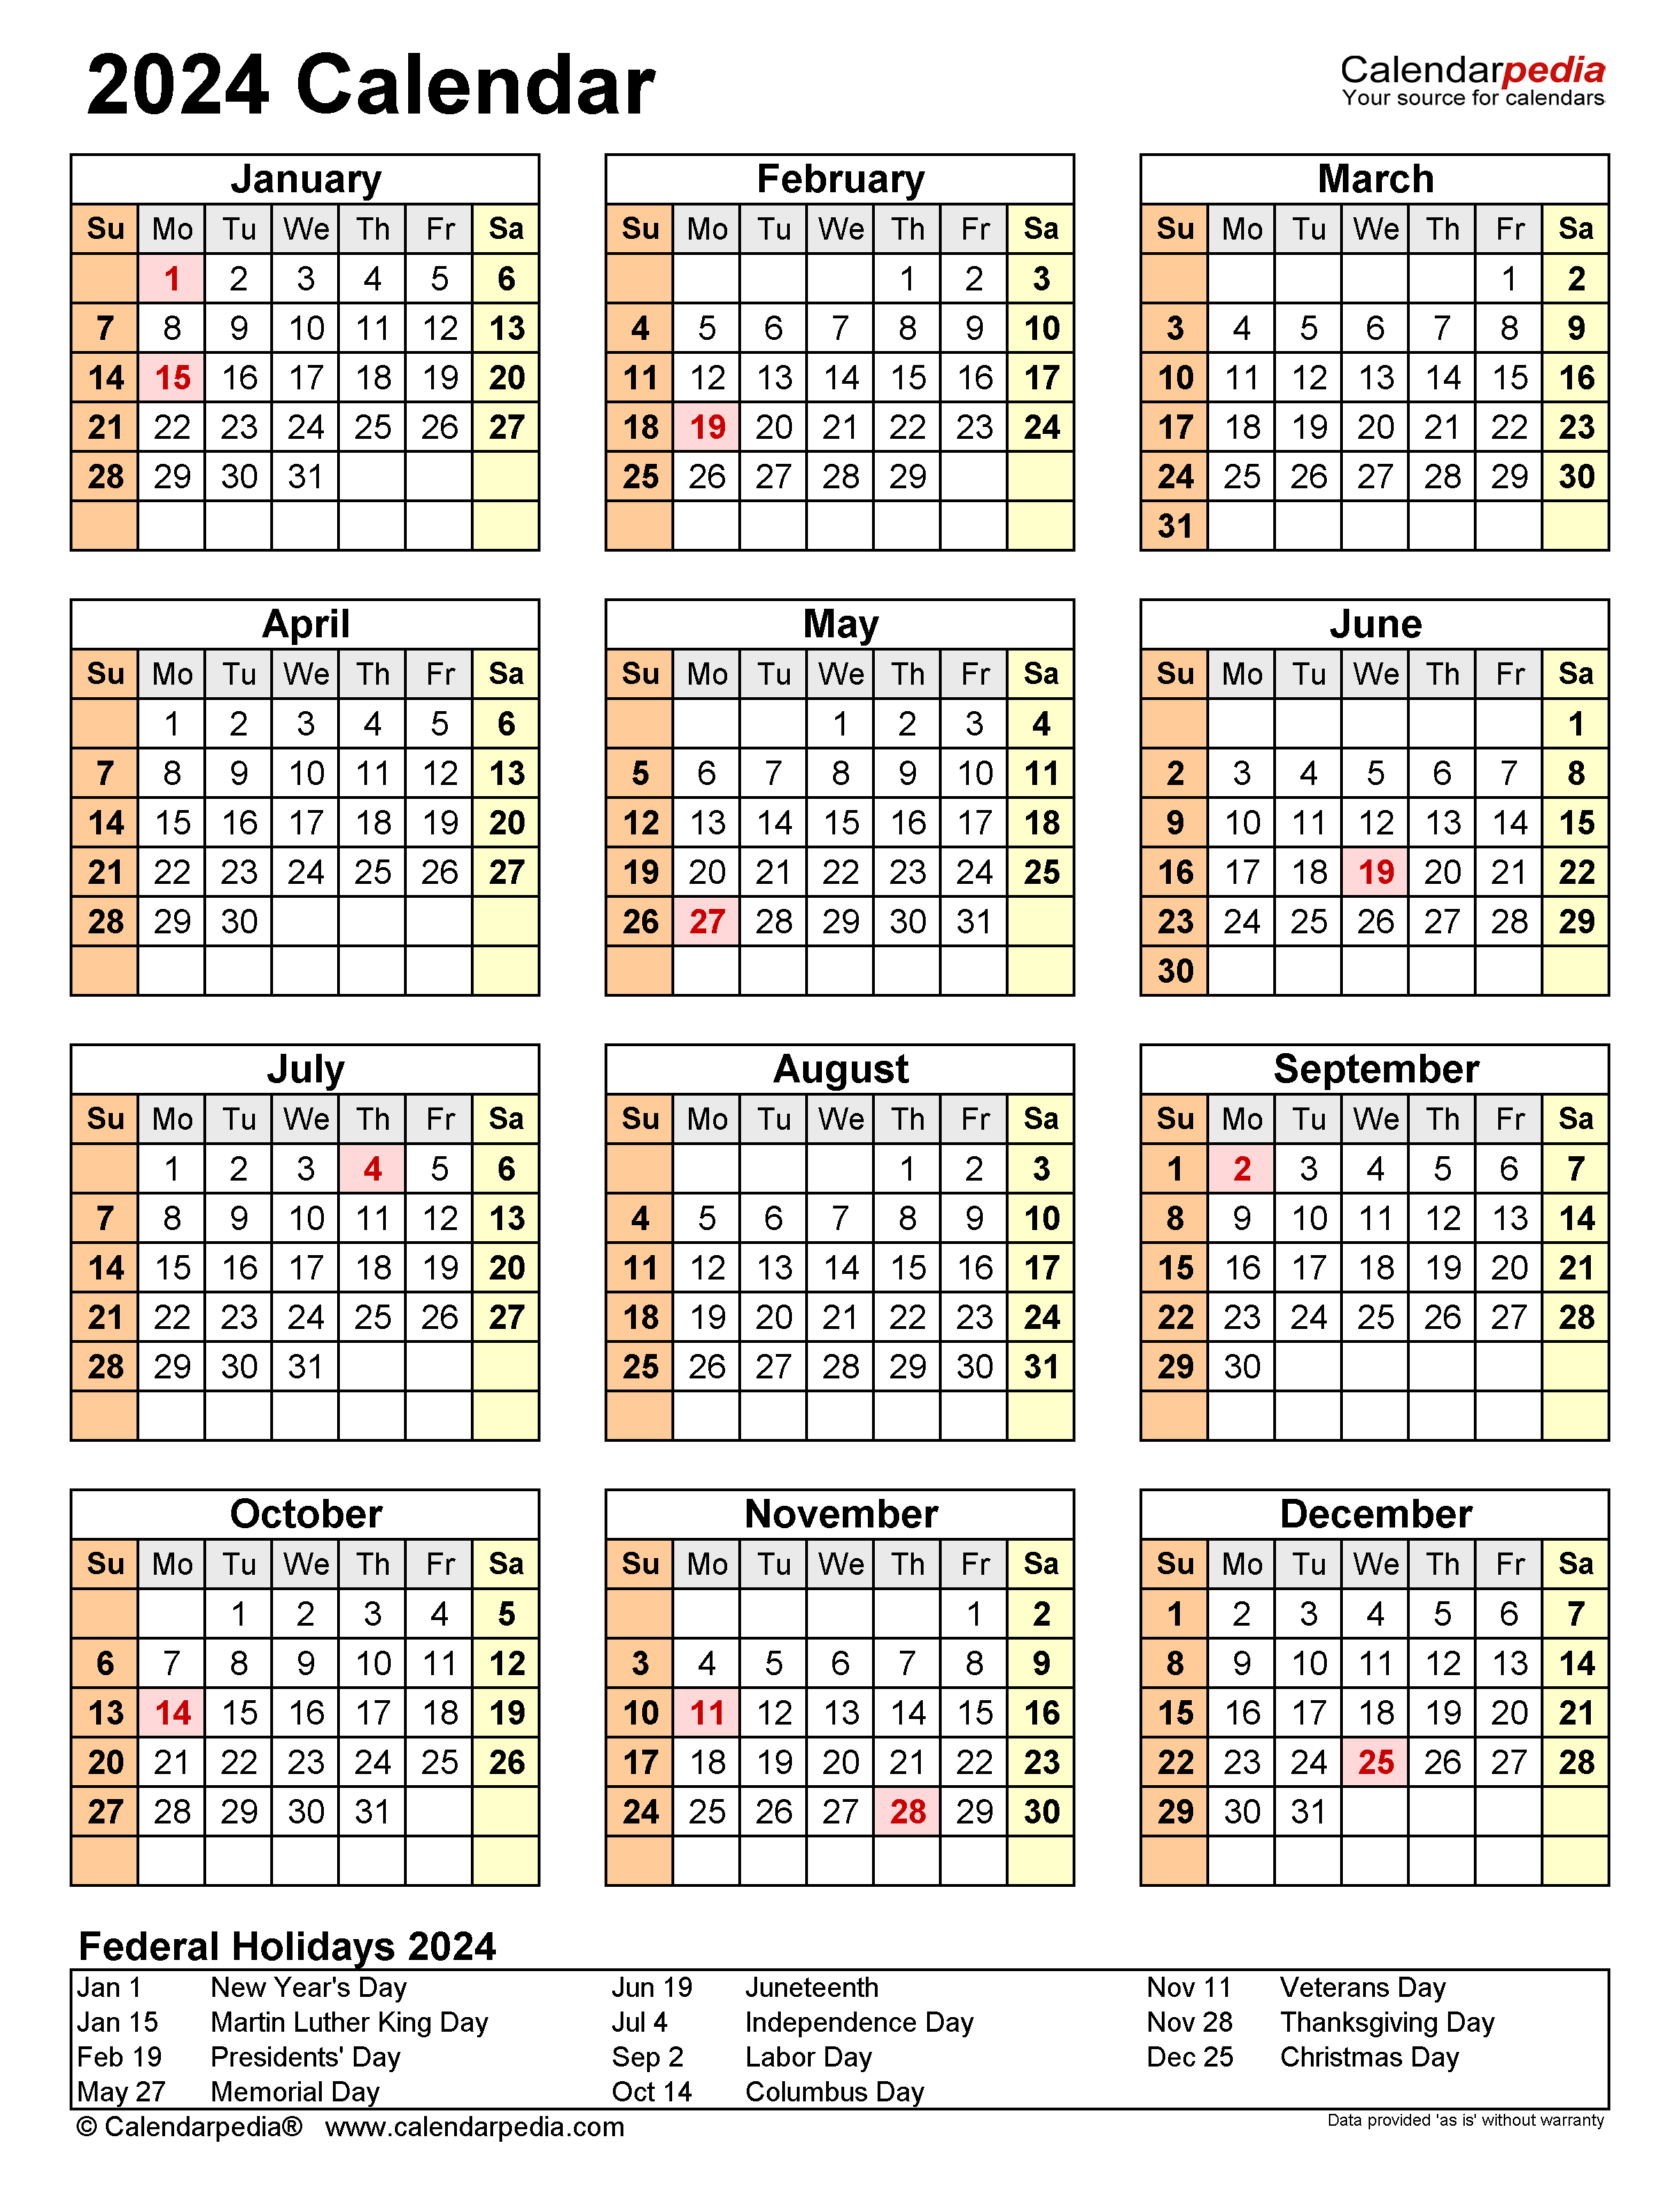 Free Printable 2024 Calendar With Holidays Crownflourmills - Free Printable 2024 Calendar With Holidays Time And Date